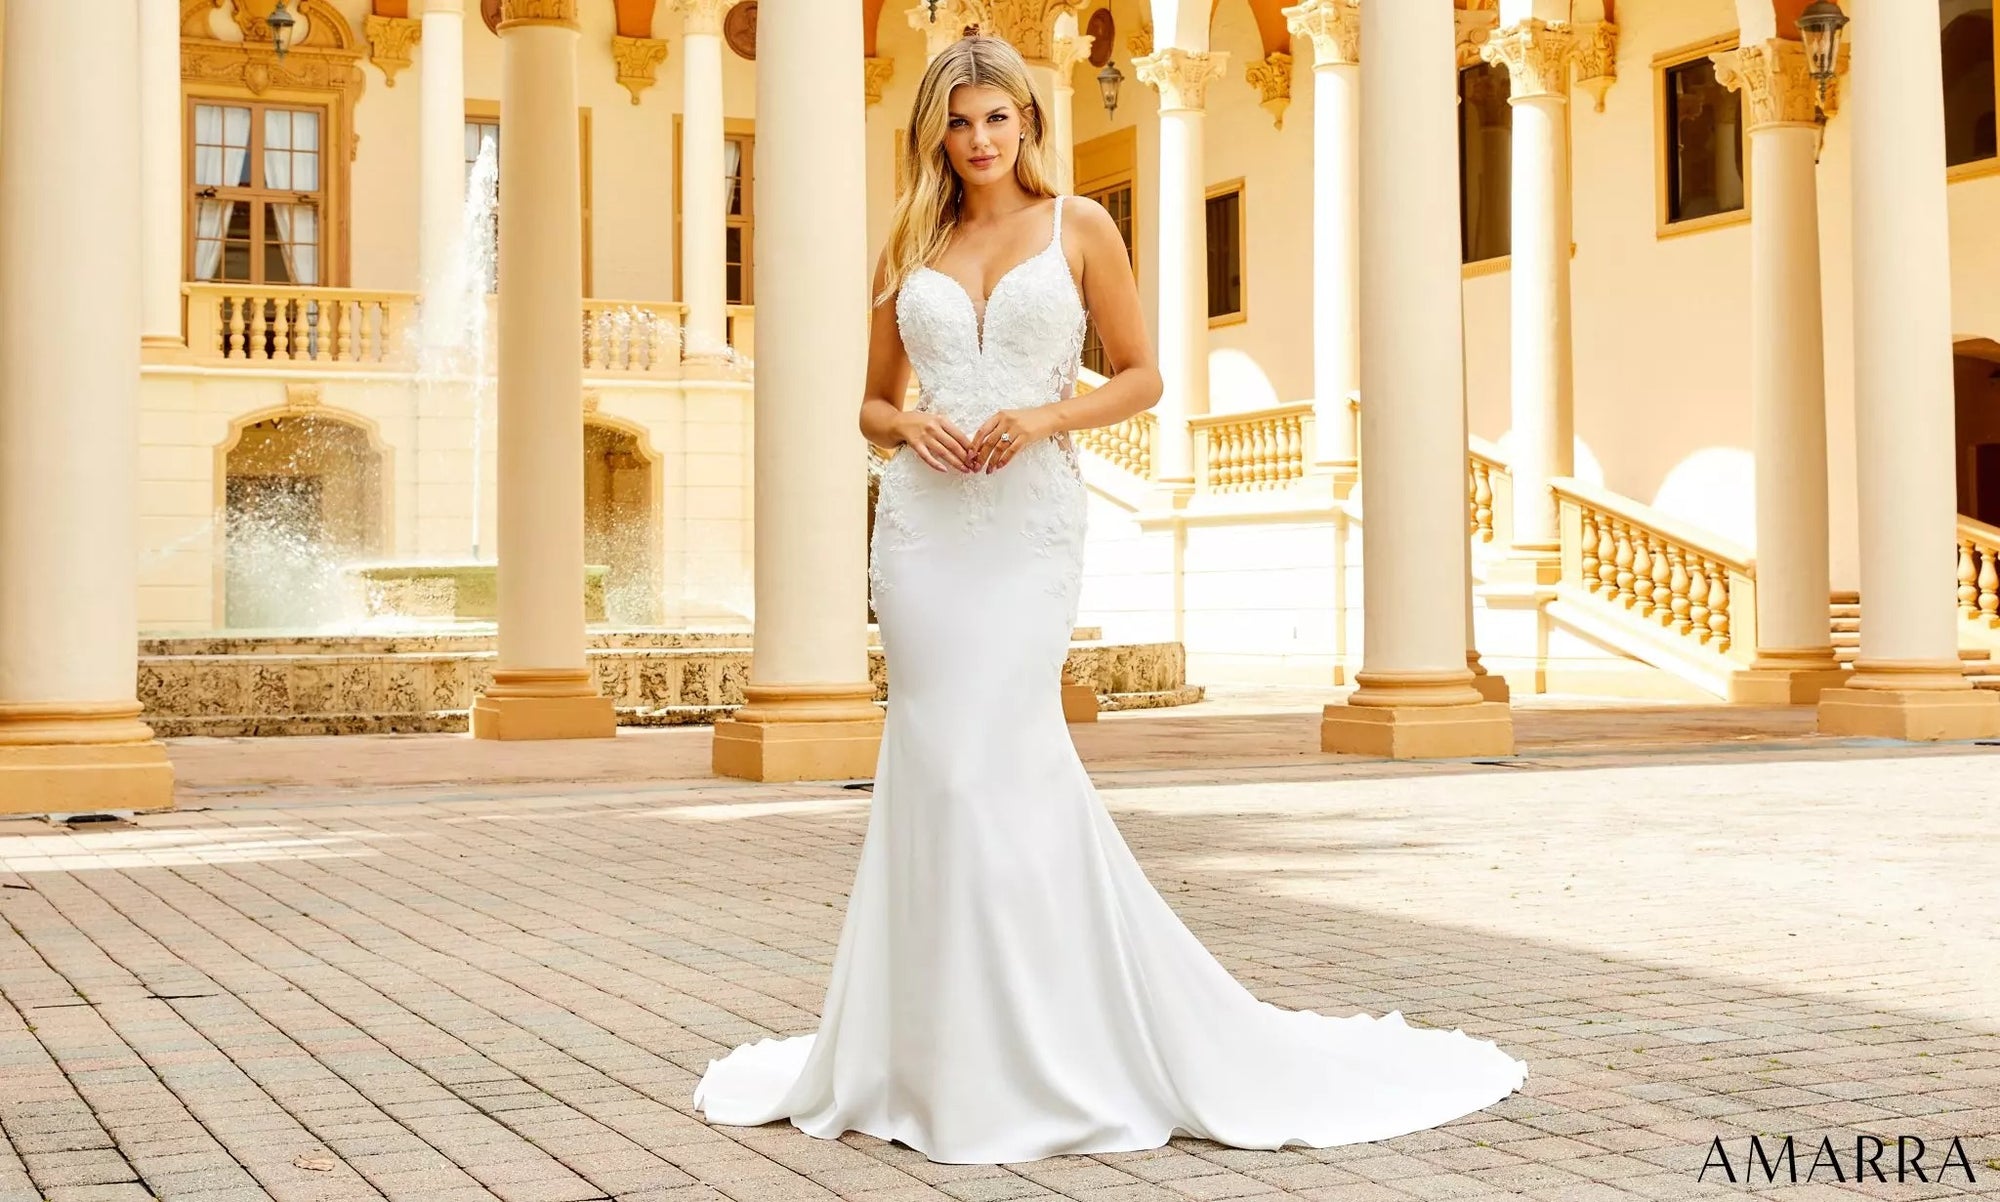 12 Things to Consider When Choosing a Wedding Dress